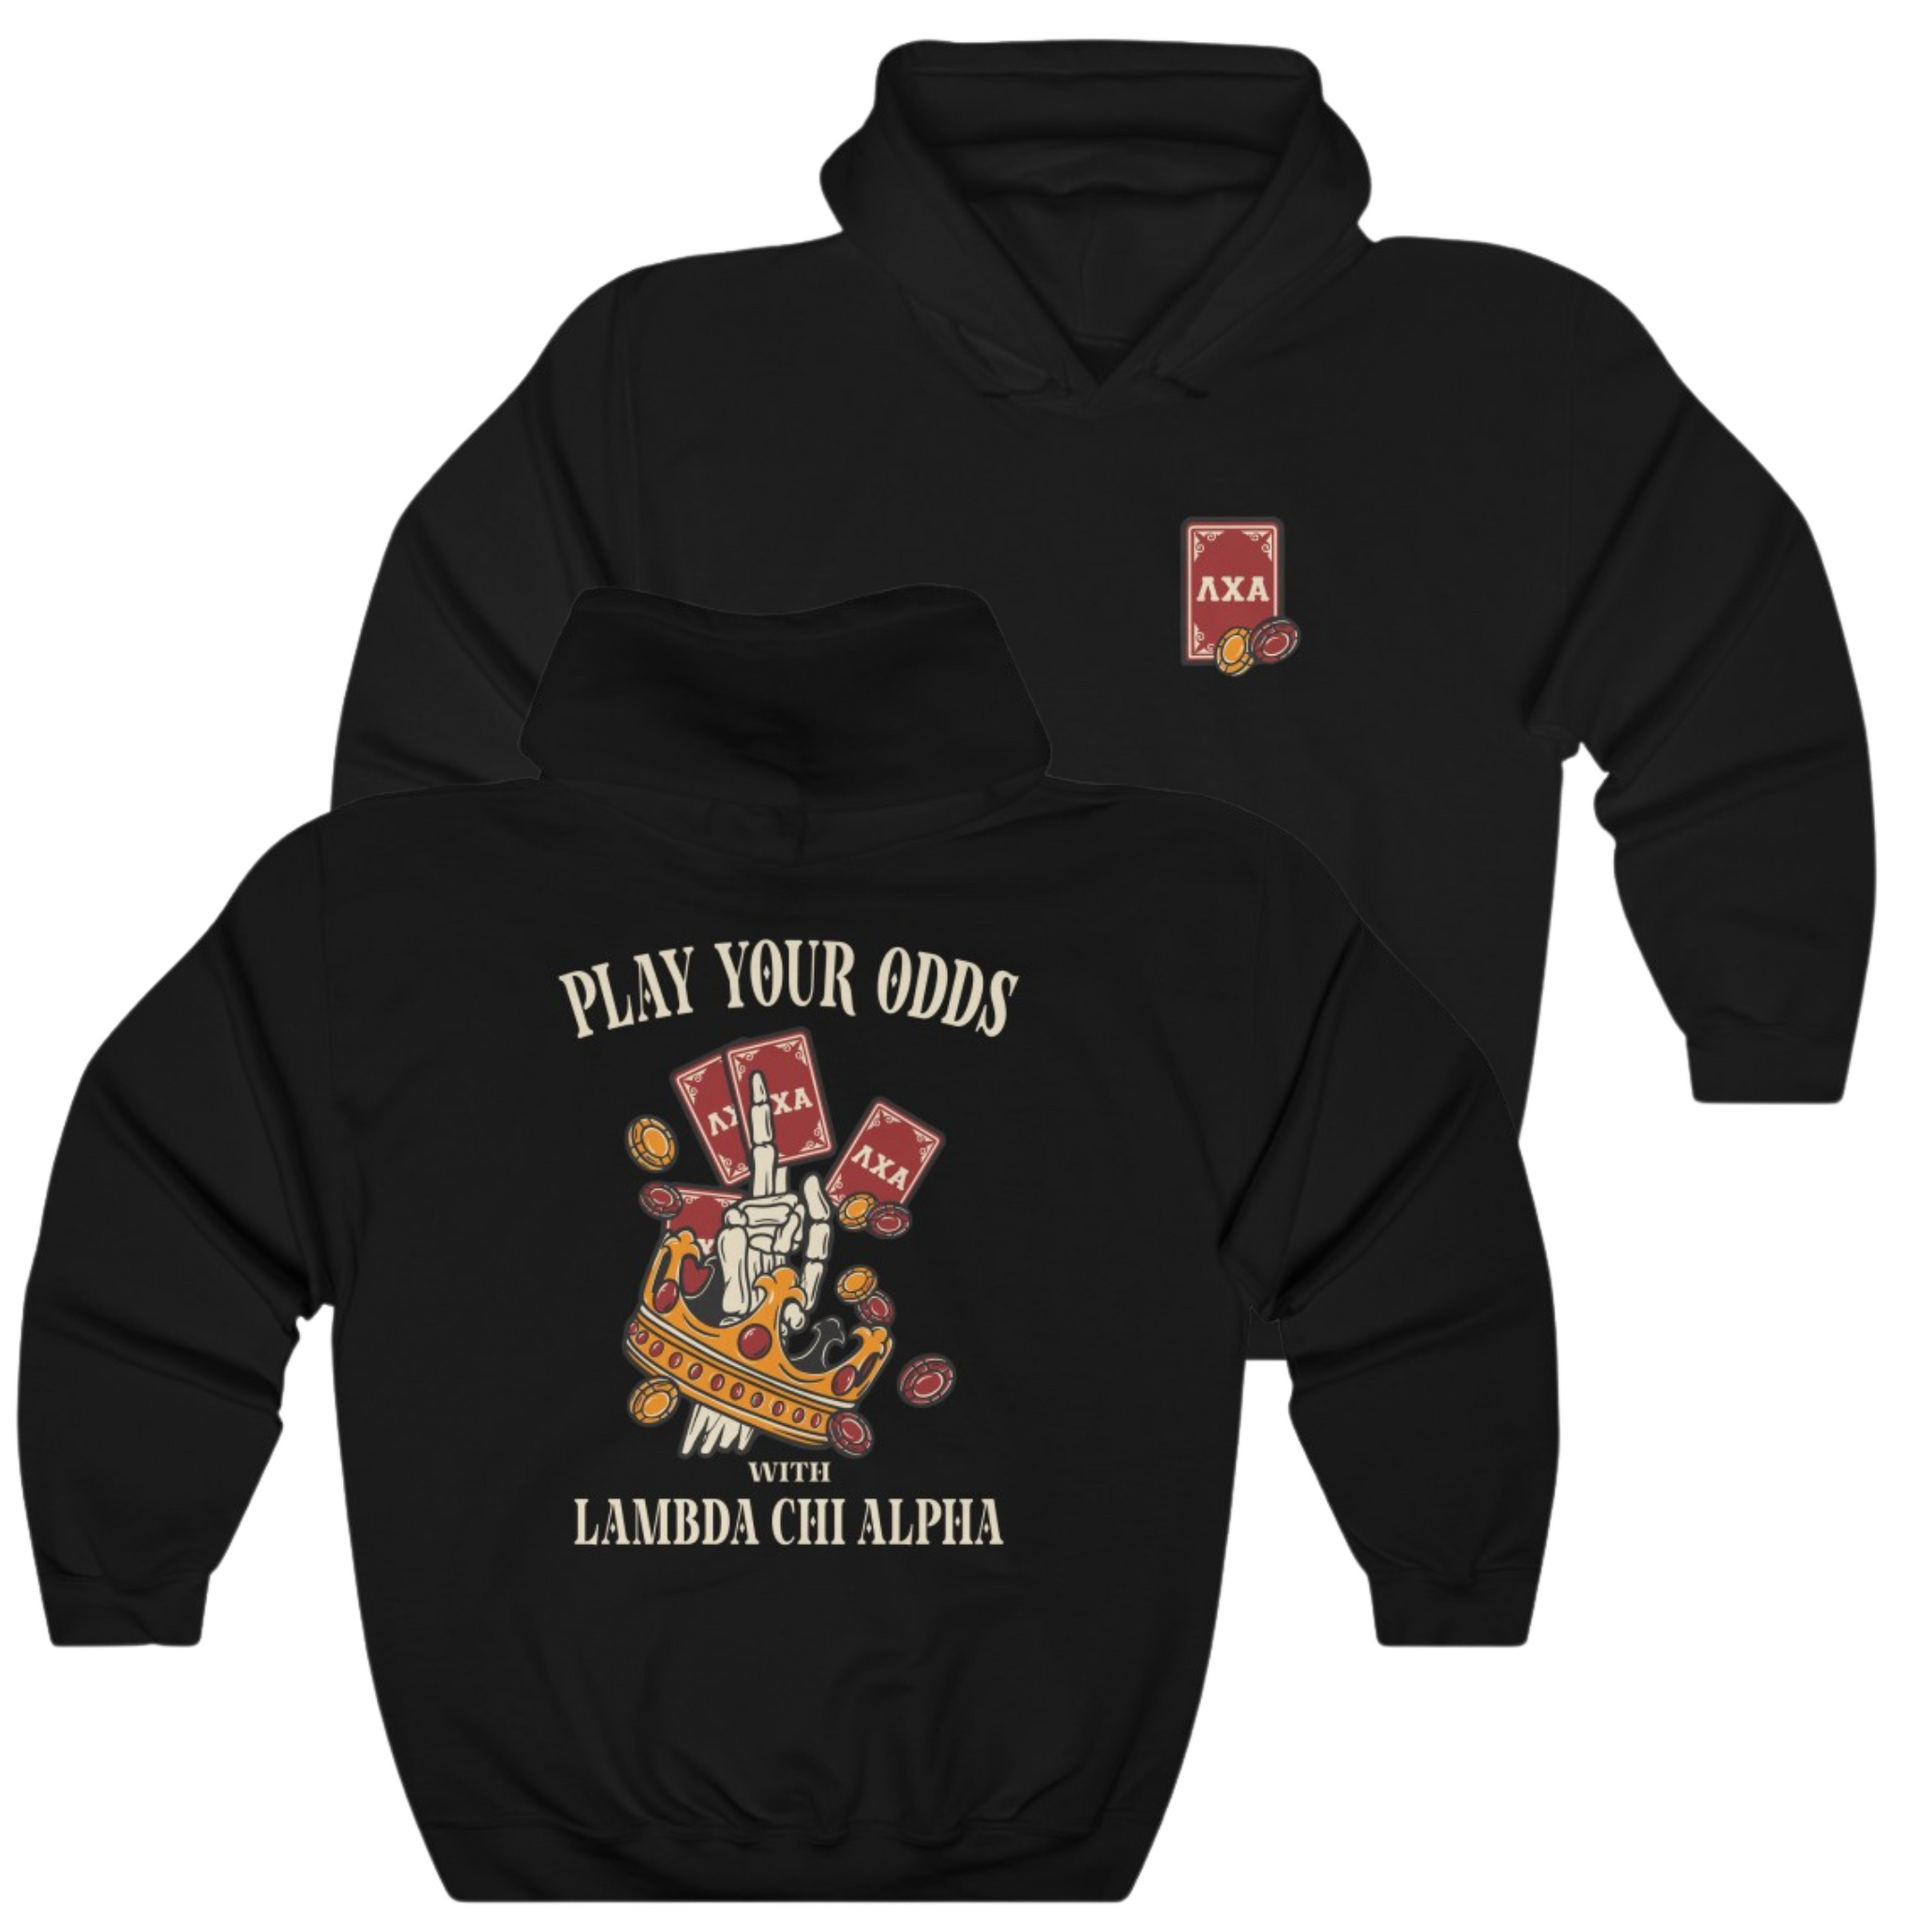 Black Lambda Chi Alpha Graphic Hoodie | Play Your Odds | Lambda Chi Alpha Fraternity Apparel 